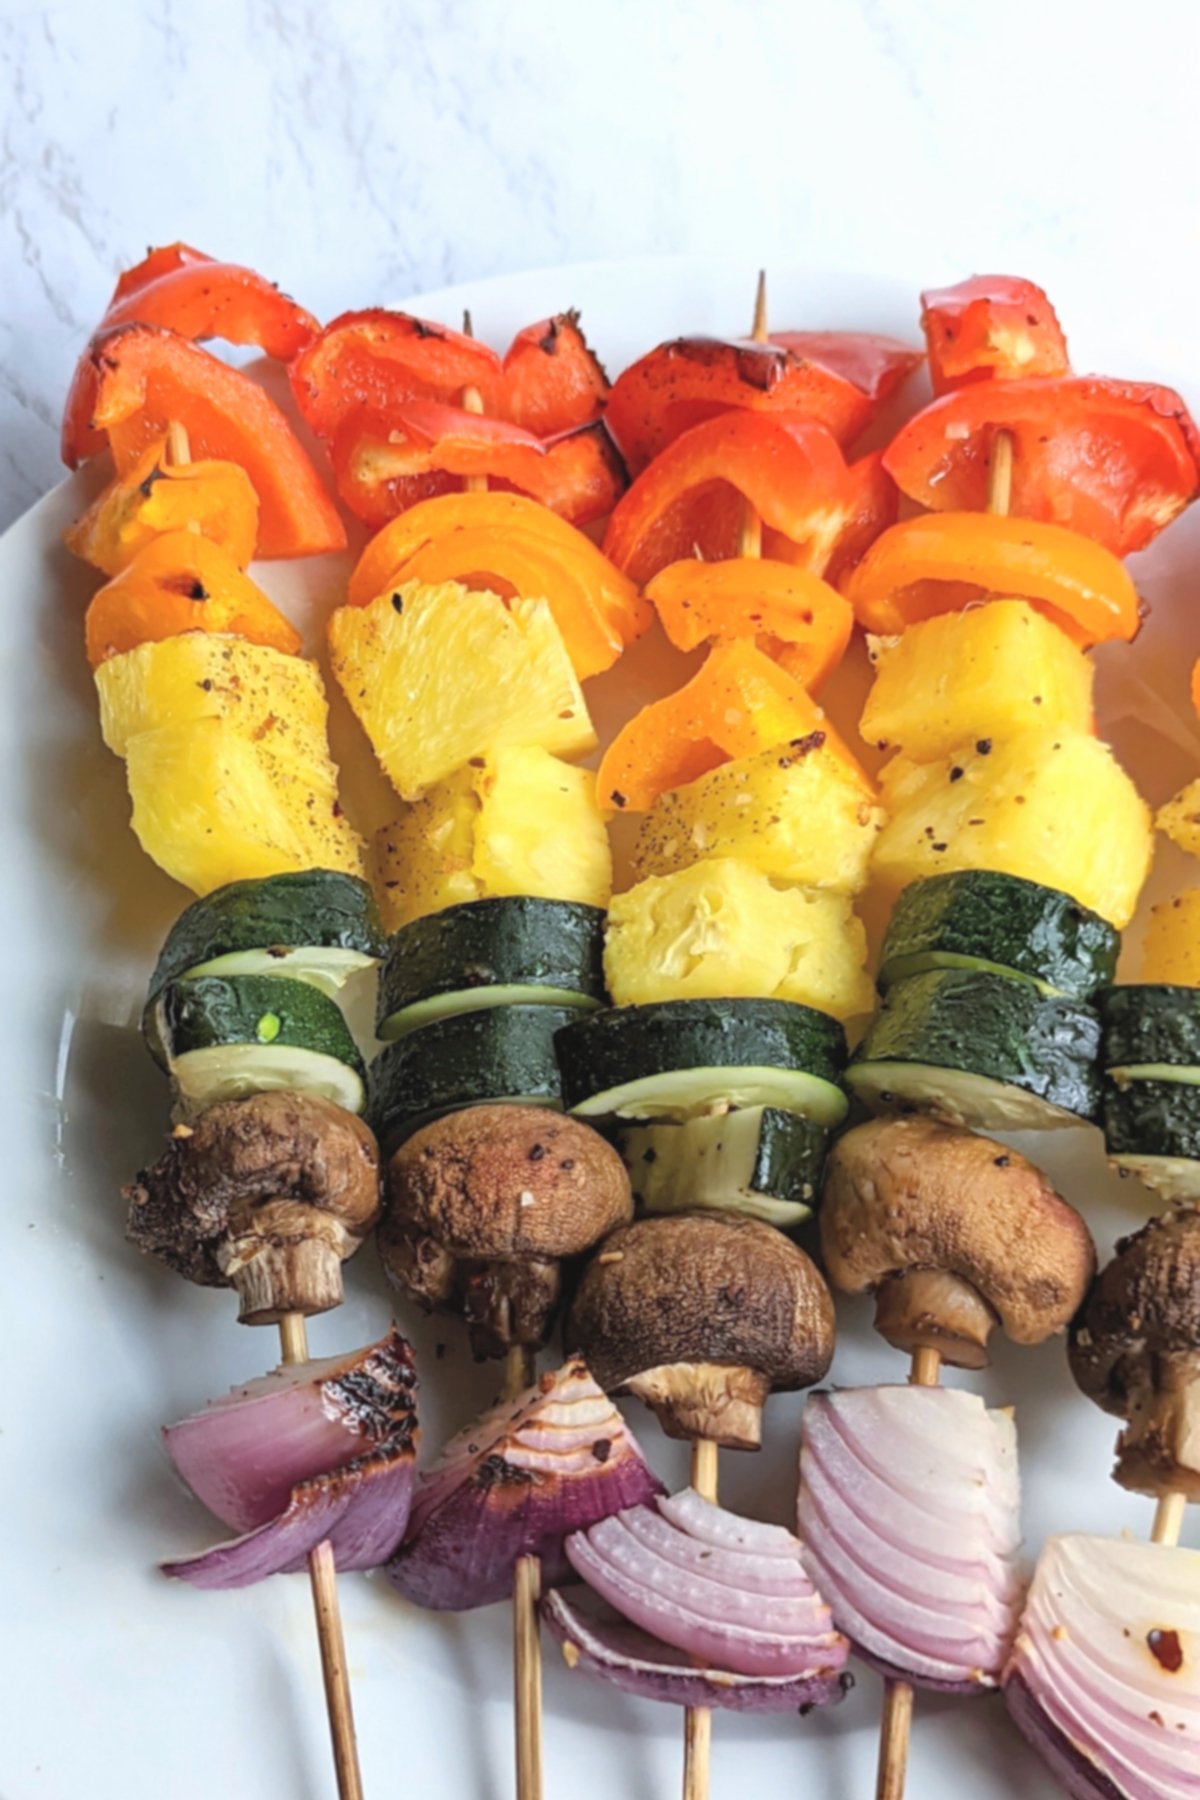 marinated veggie kabobs cooked in oven at home recipe no grill kabobs cook on a sheet pan at home